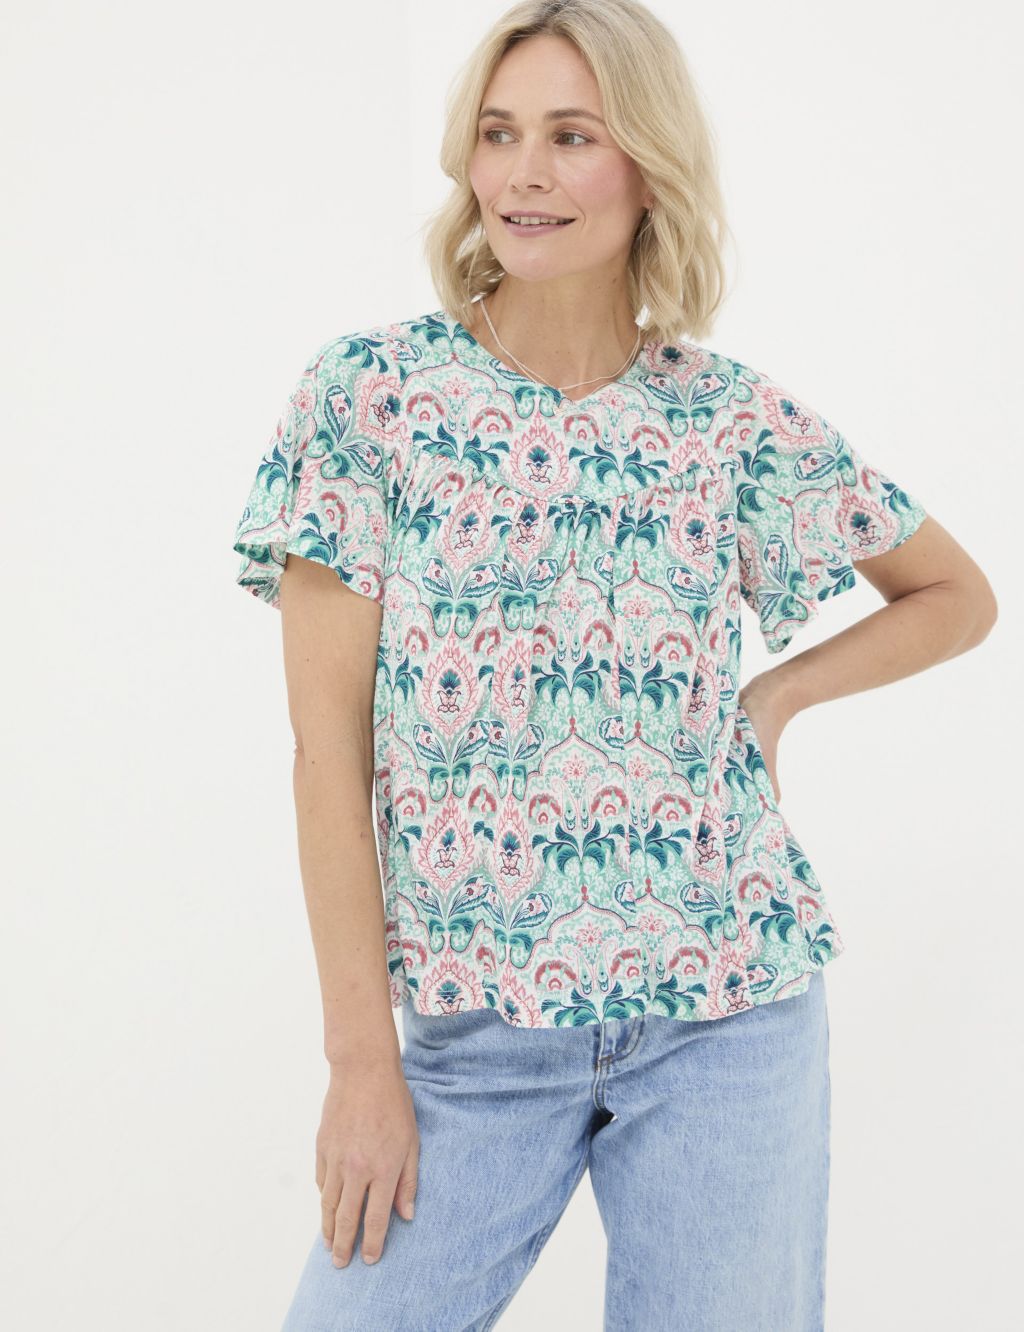 Mirrored Paisley Top with Linen